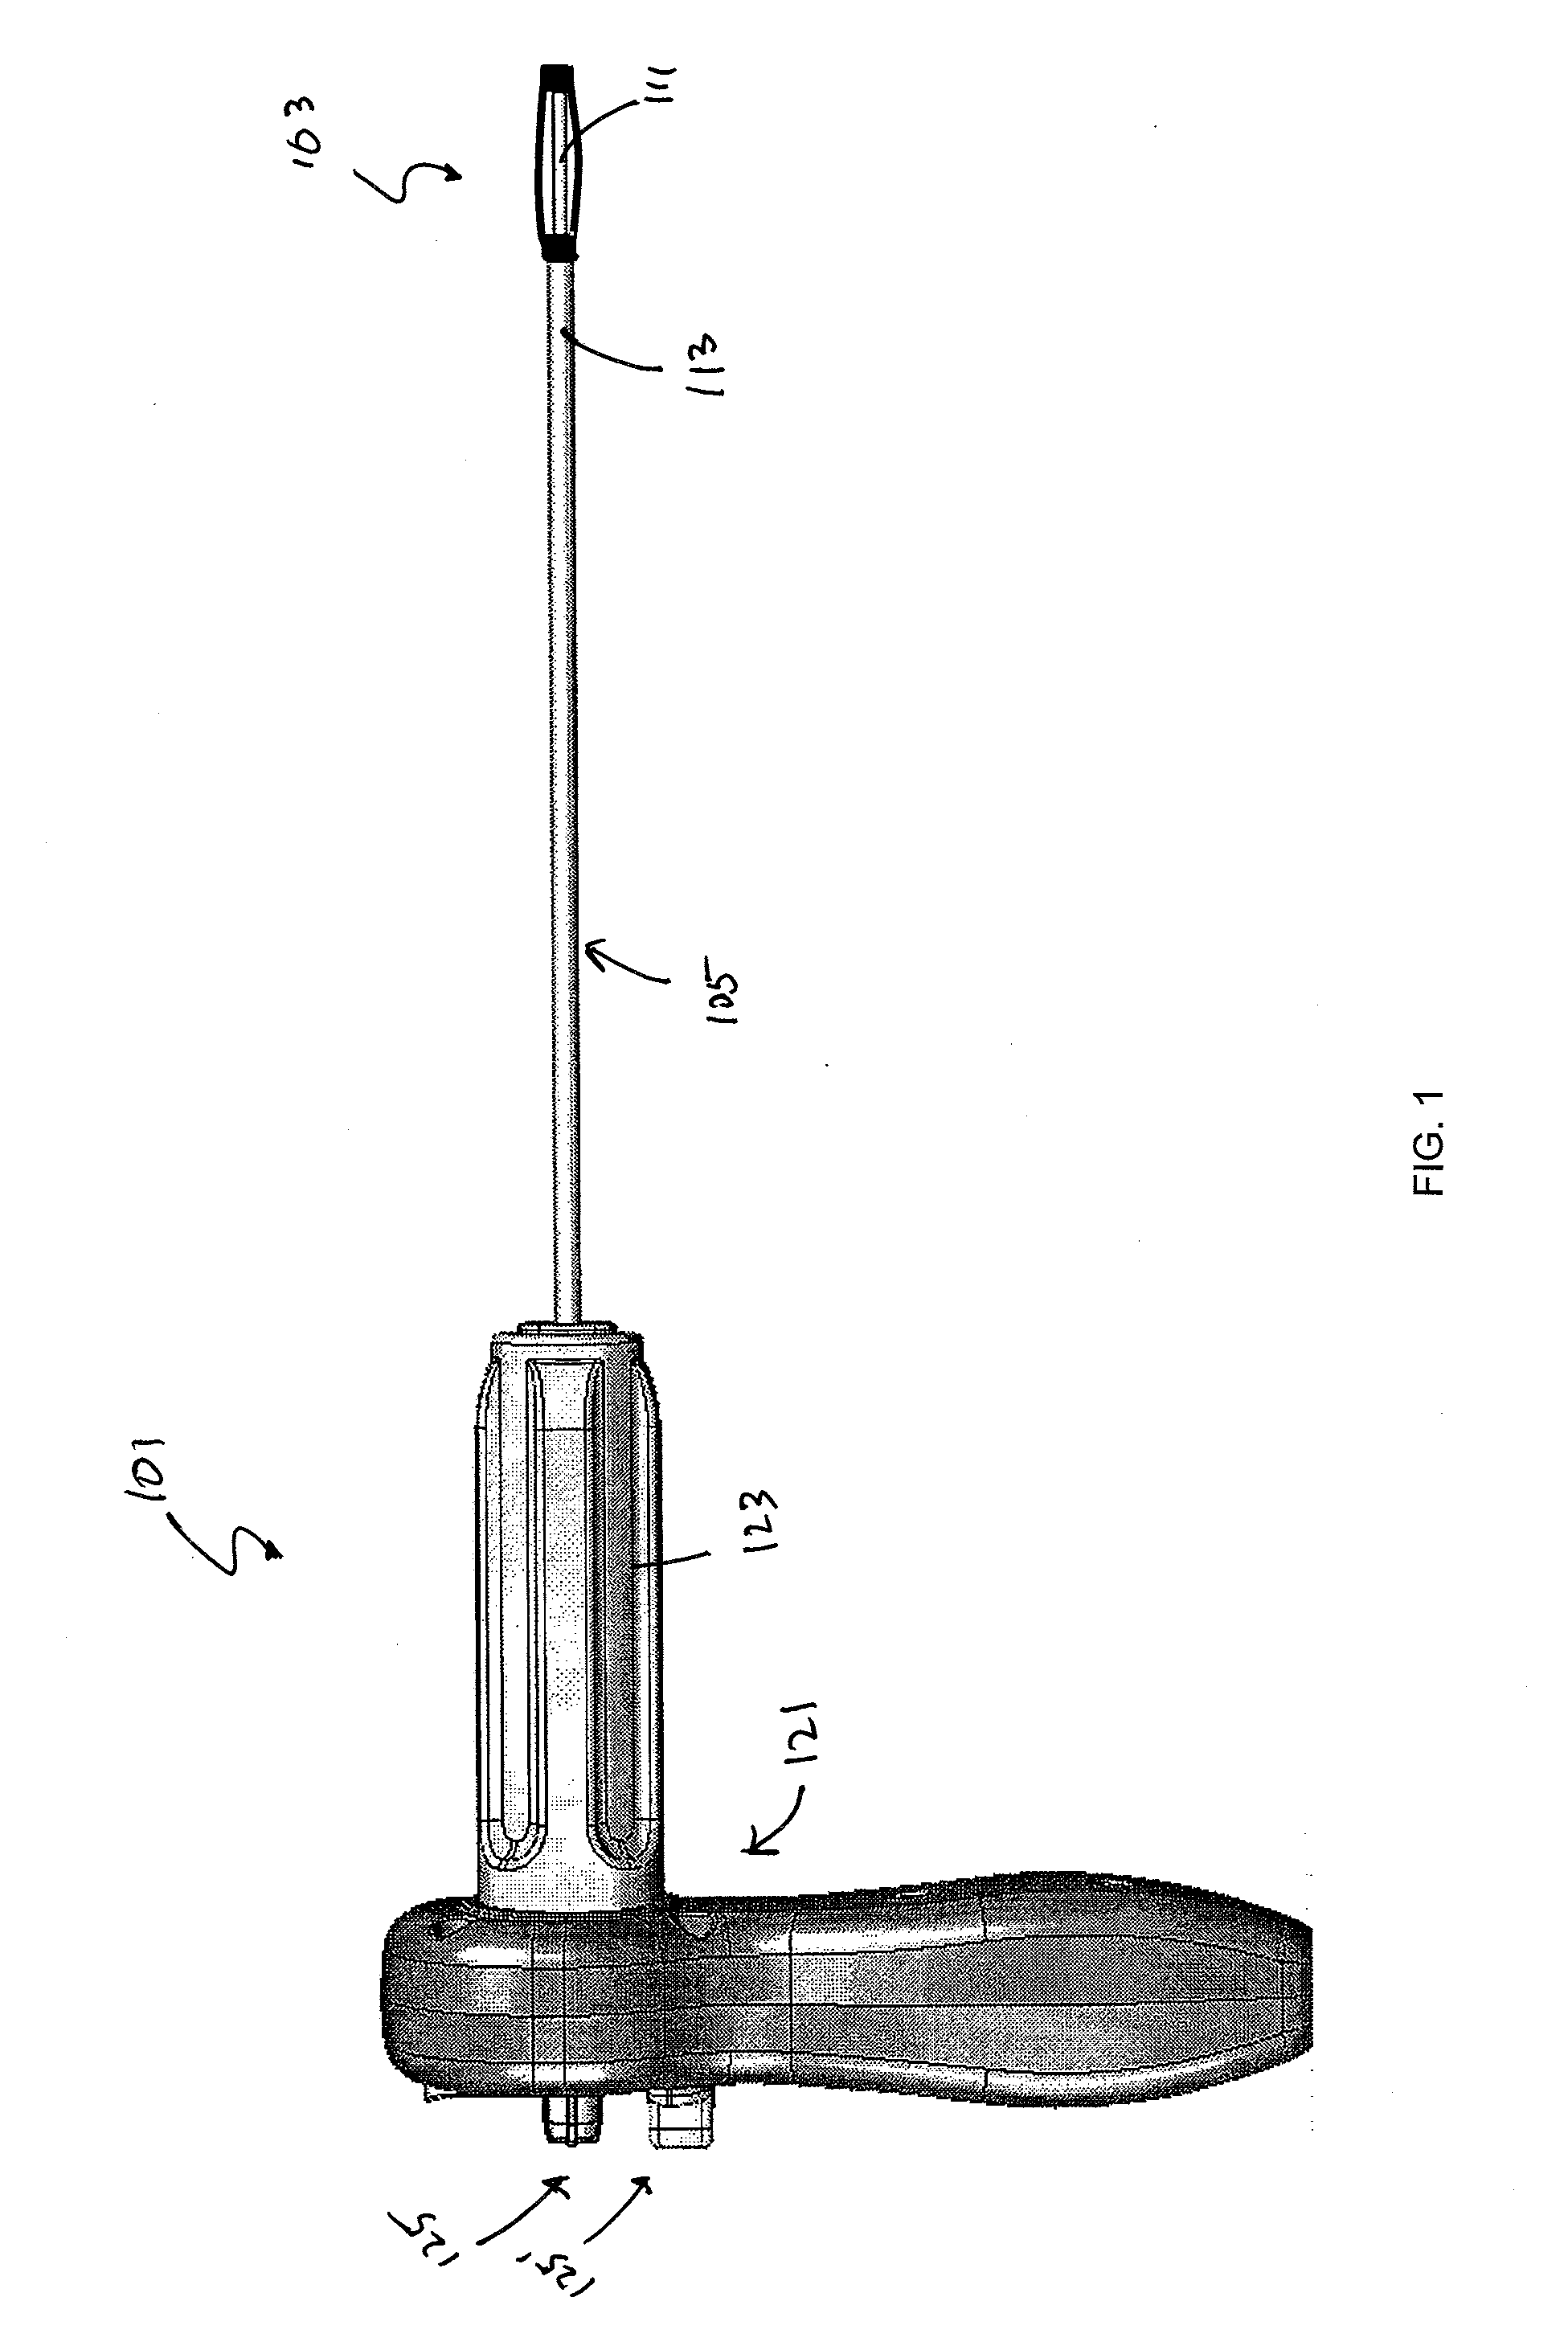 Controlled deployment handles for bone stabilization devices